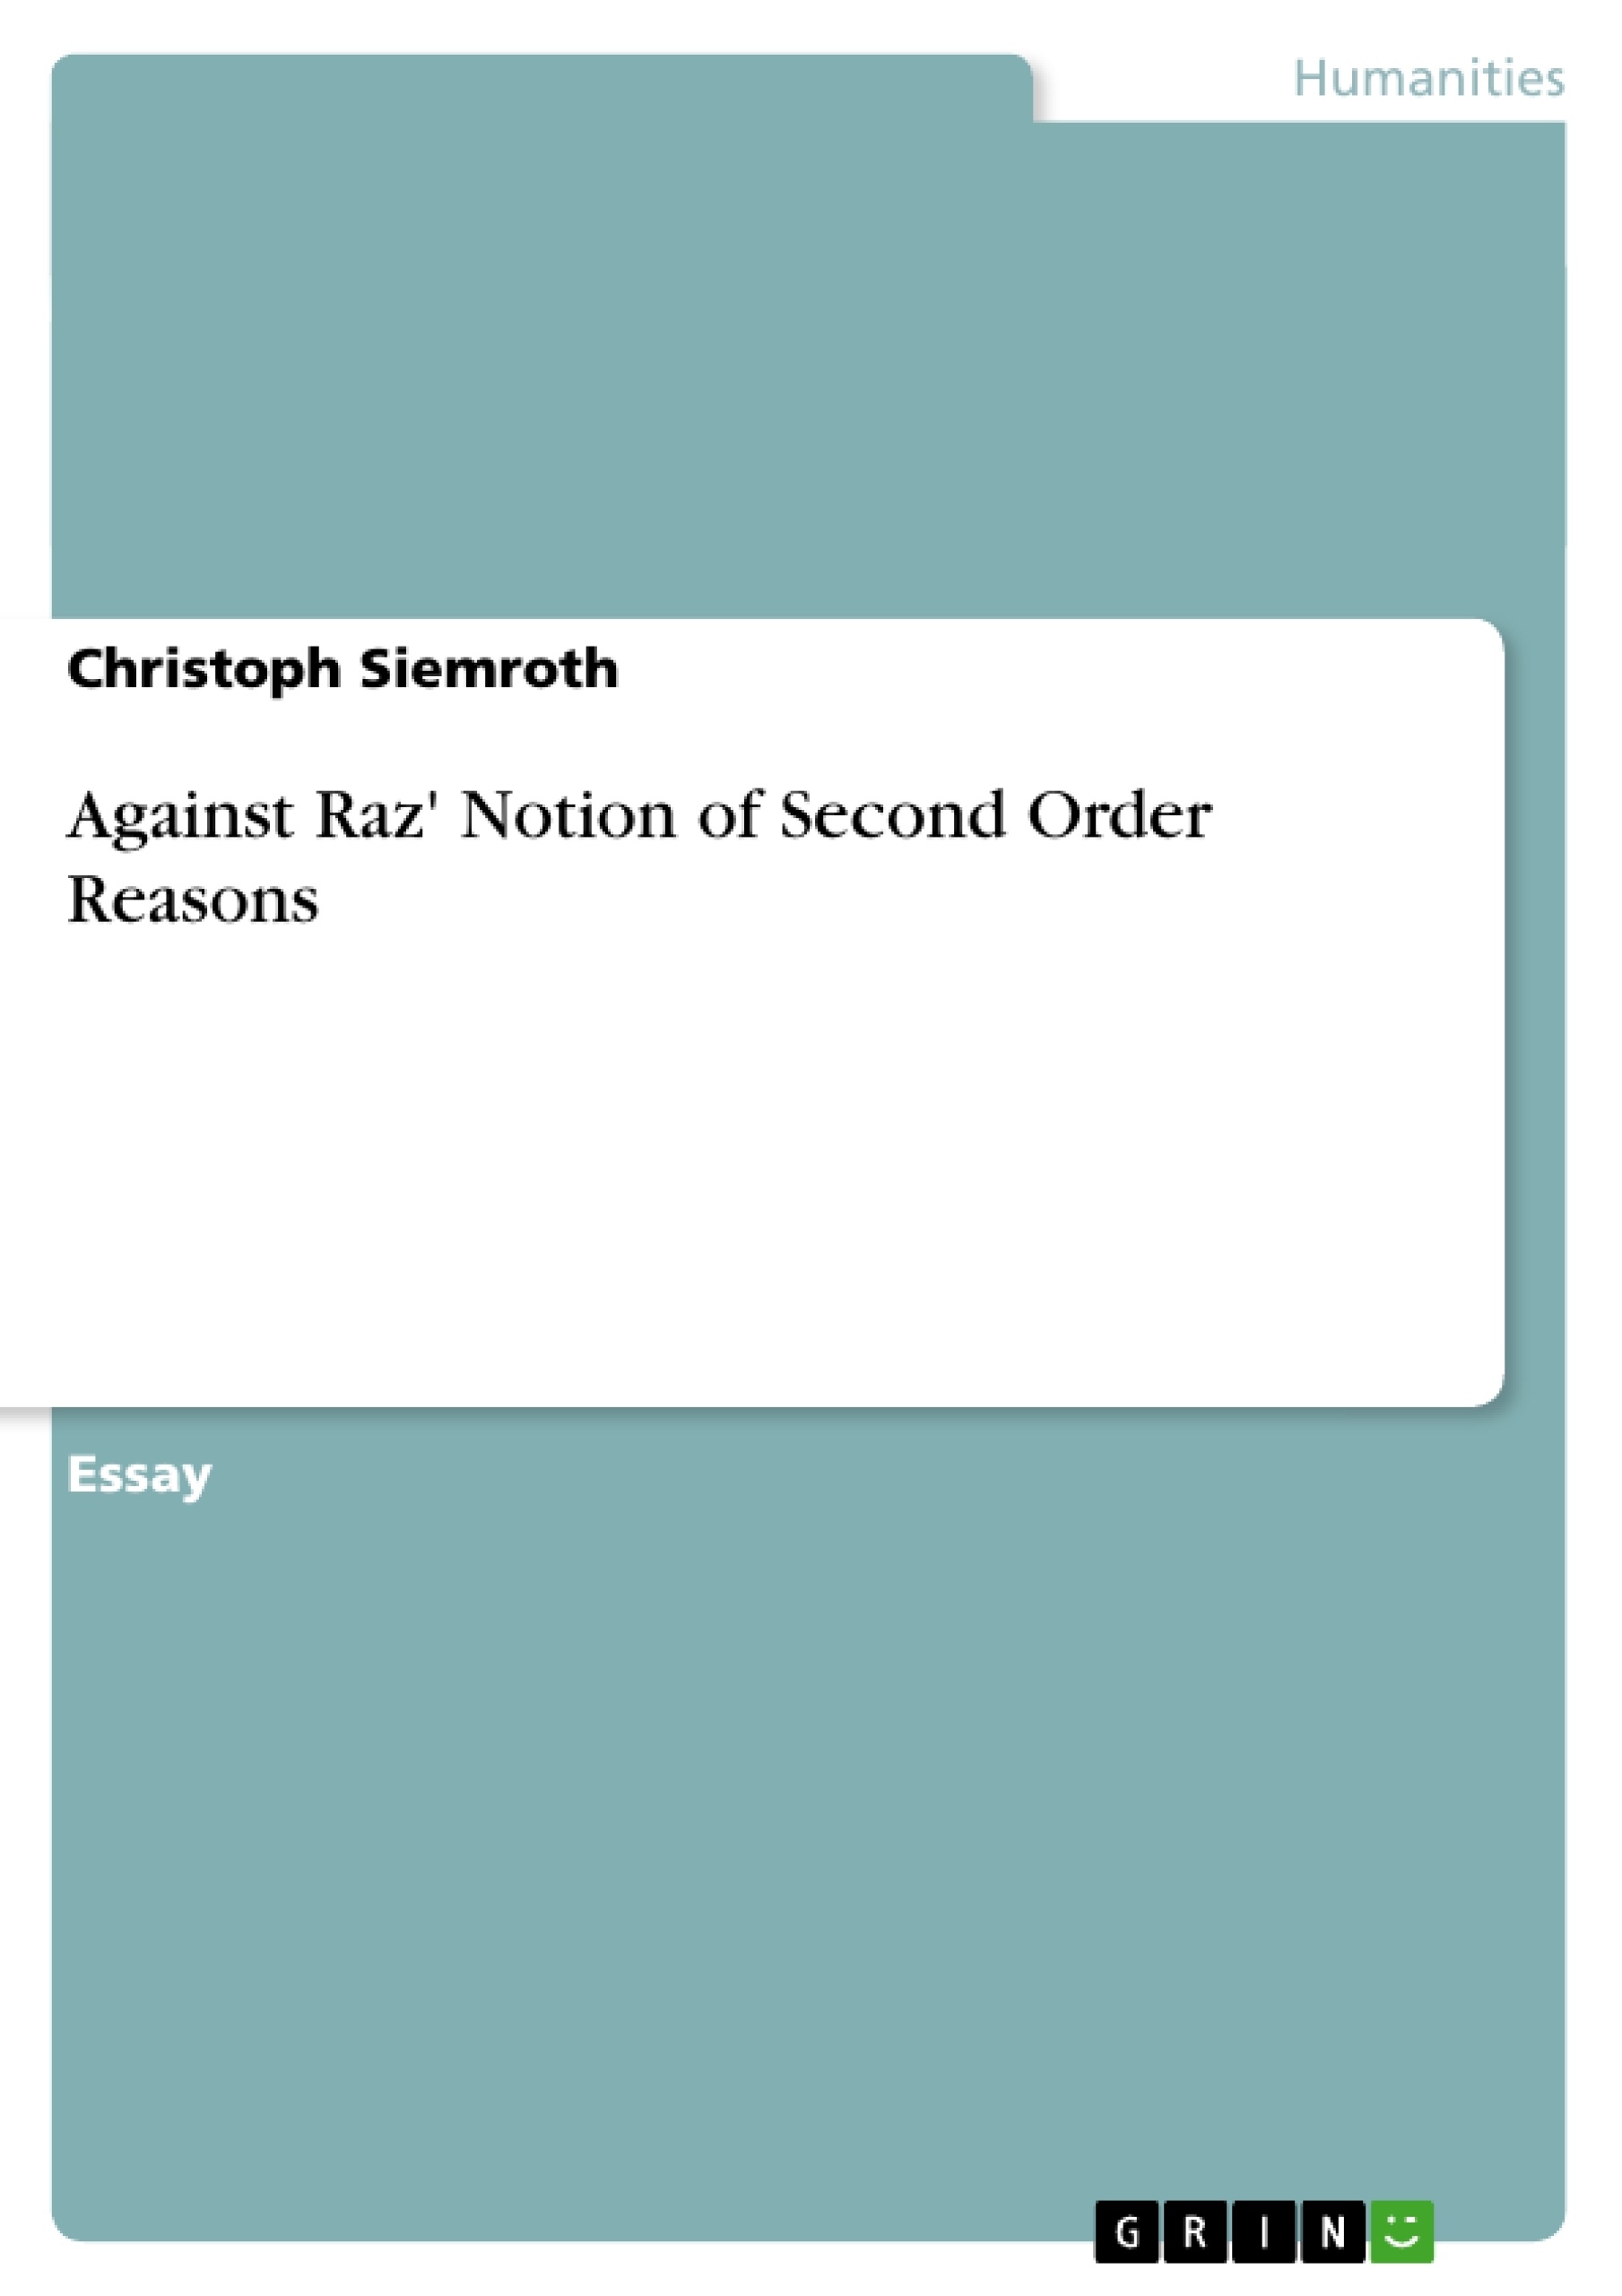 Título: Against Raz' Notion of Second Order Reasons